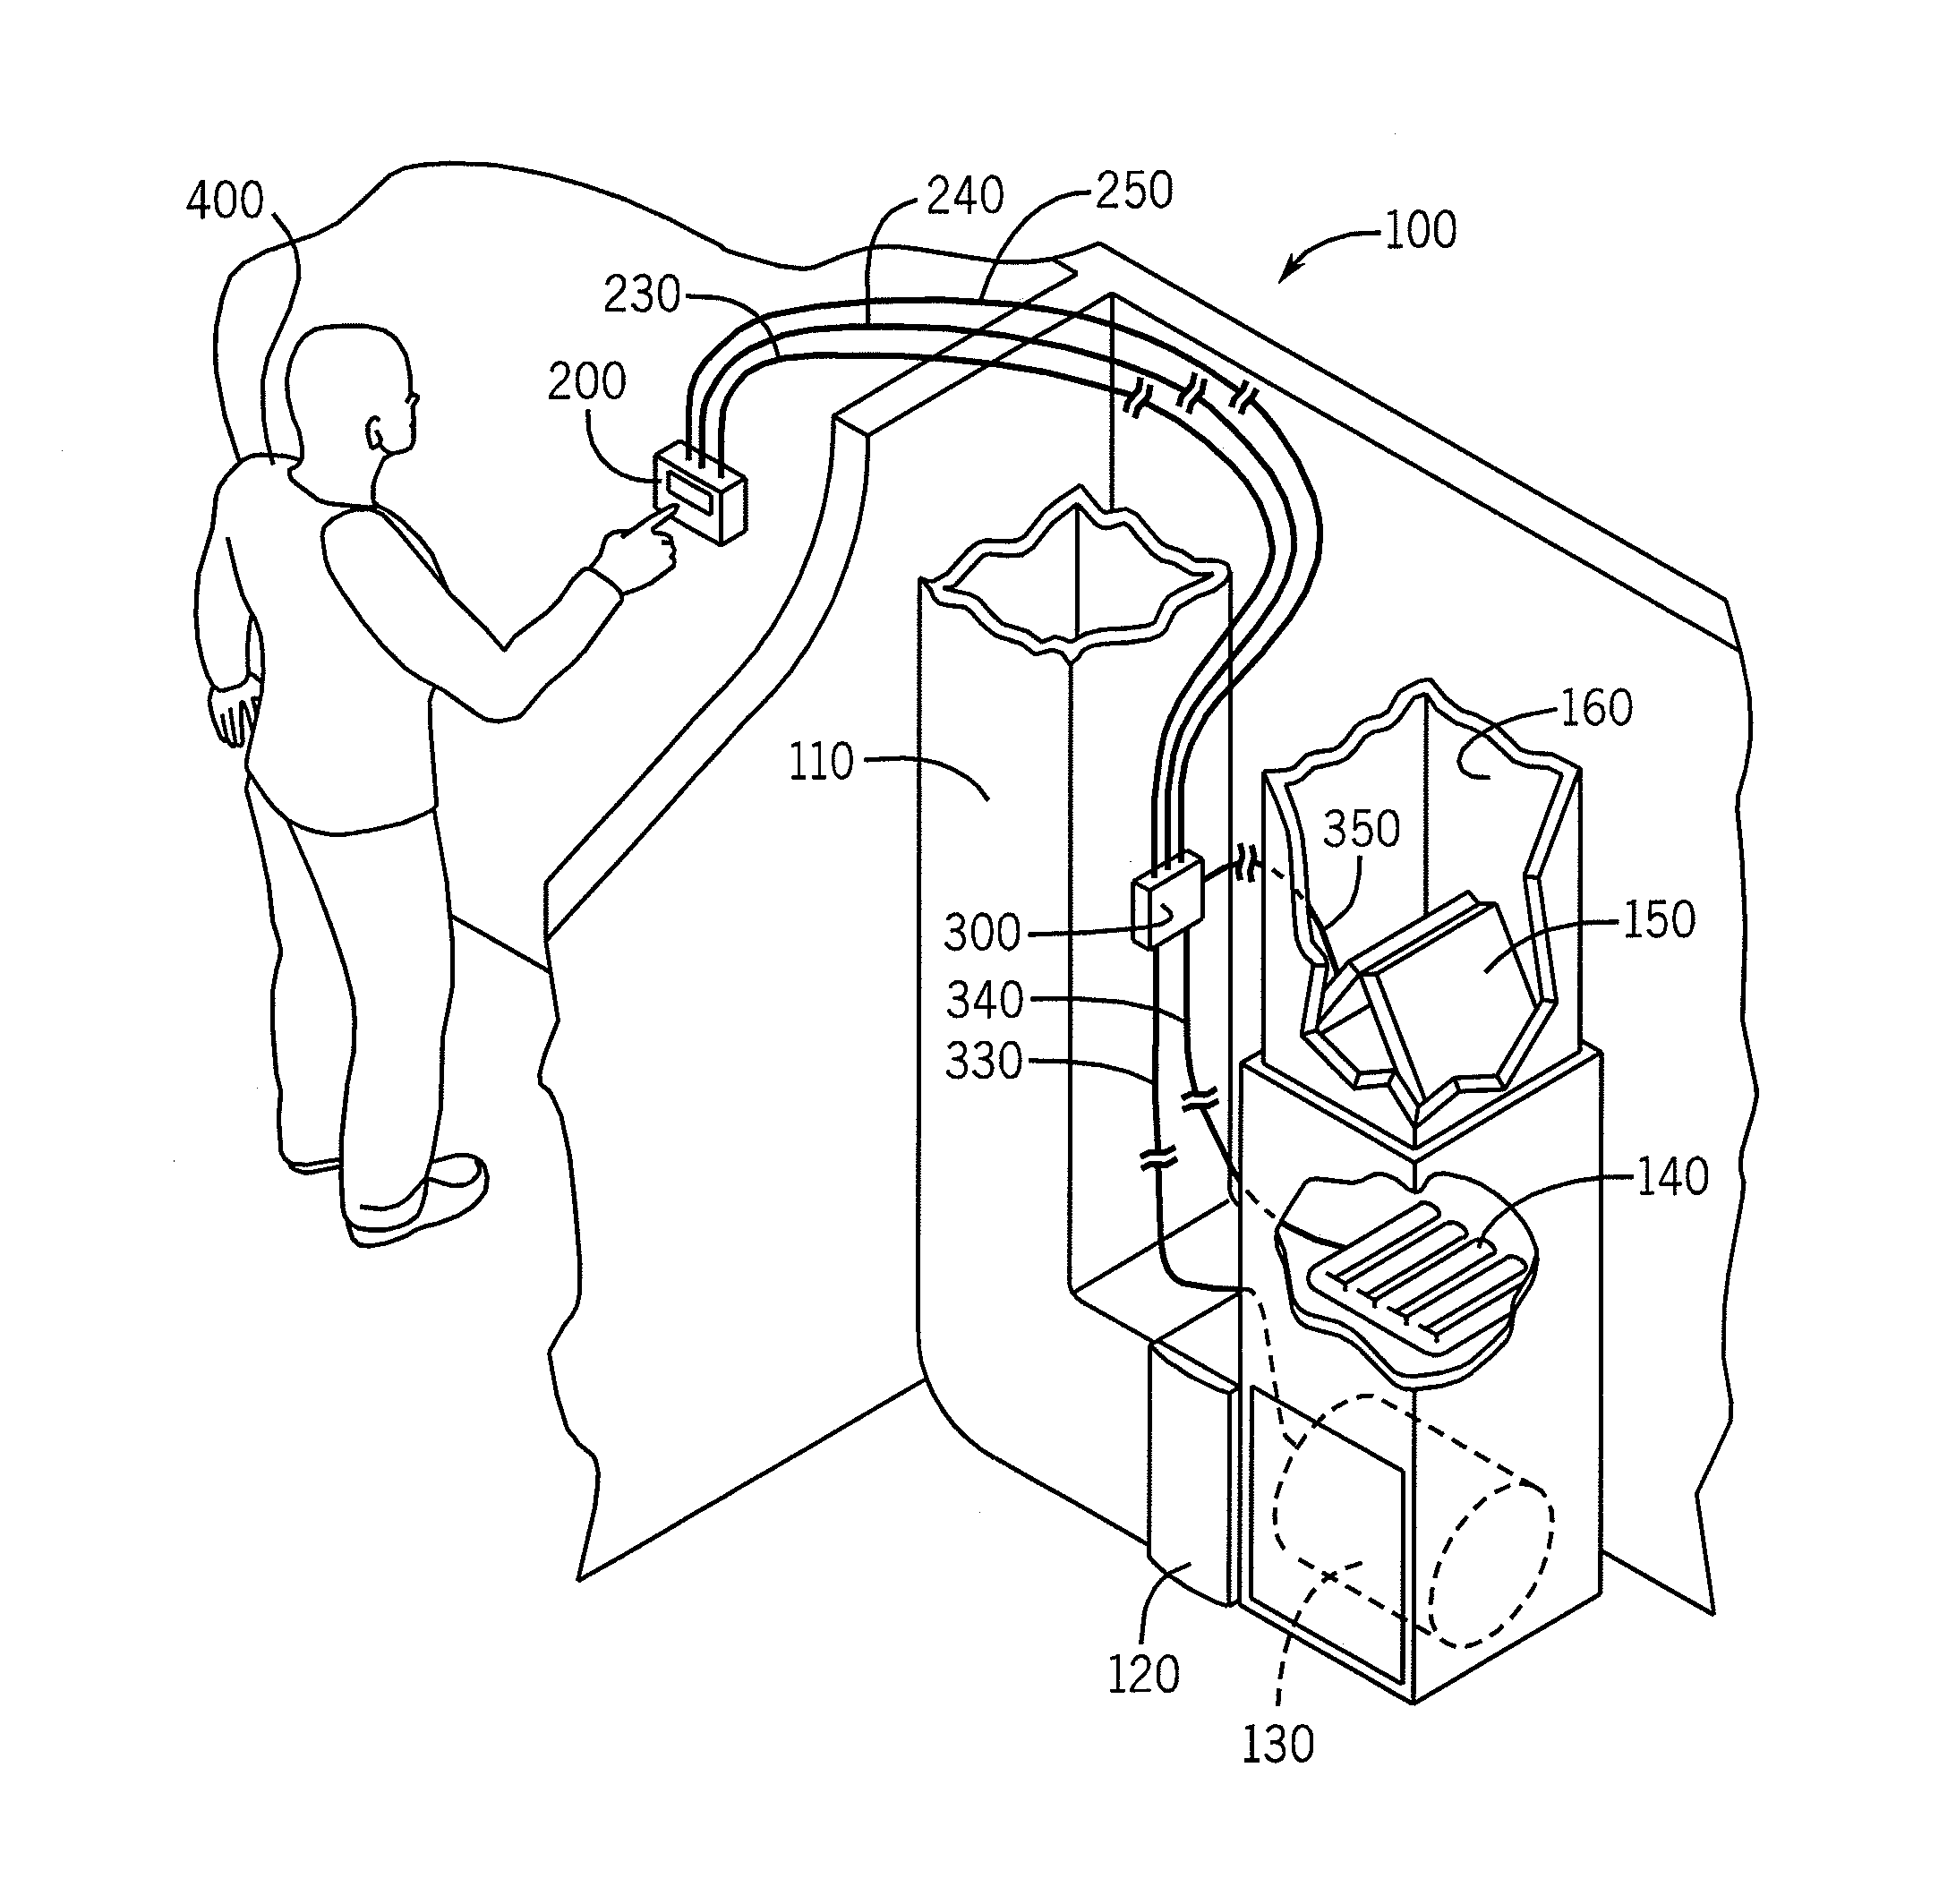 System and method for operation of an HVAC system to adjust ambient air temperature